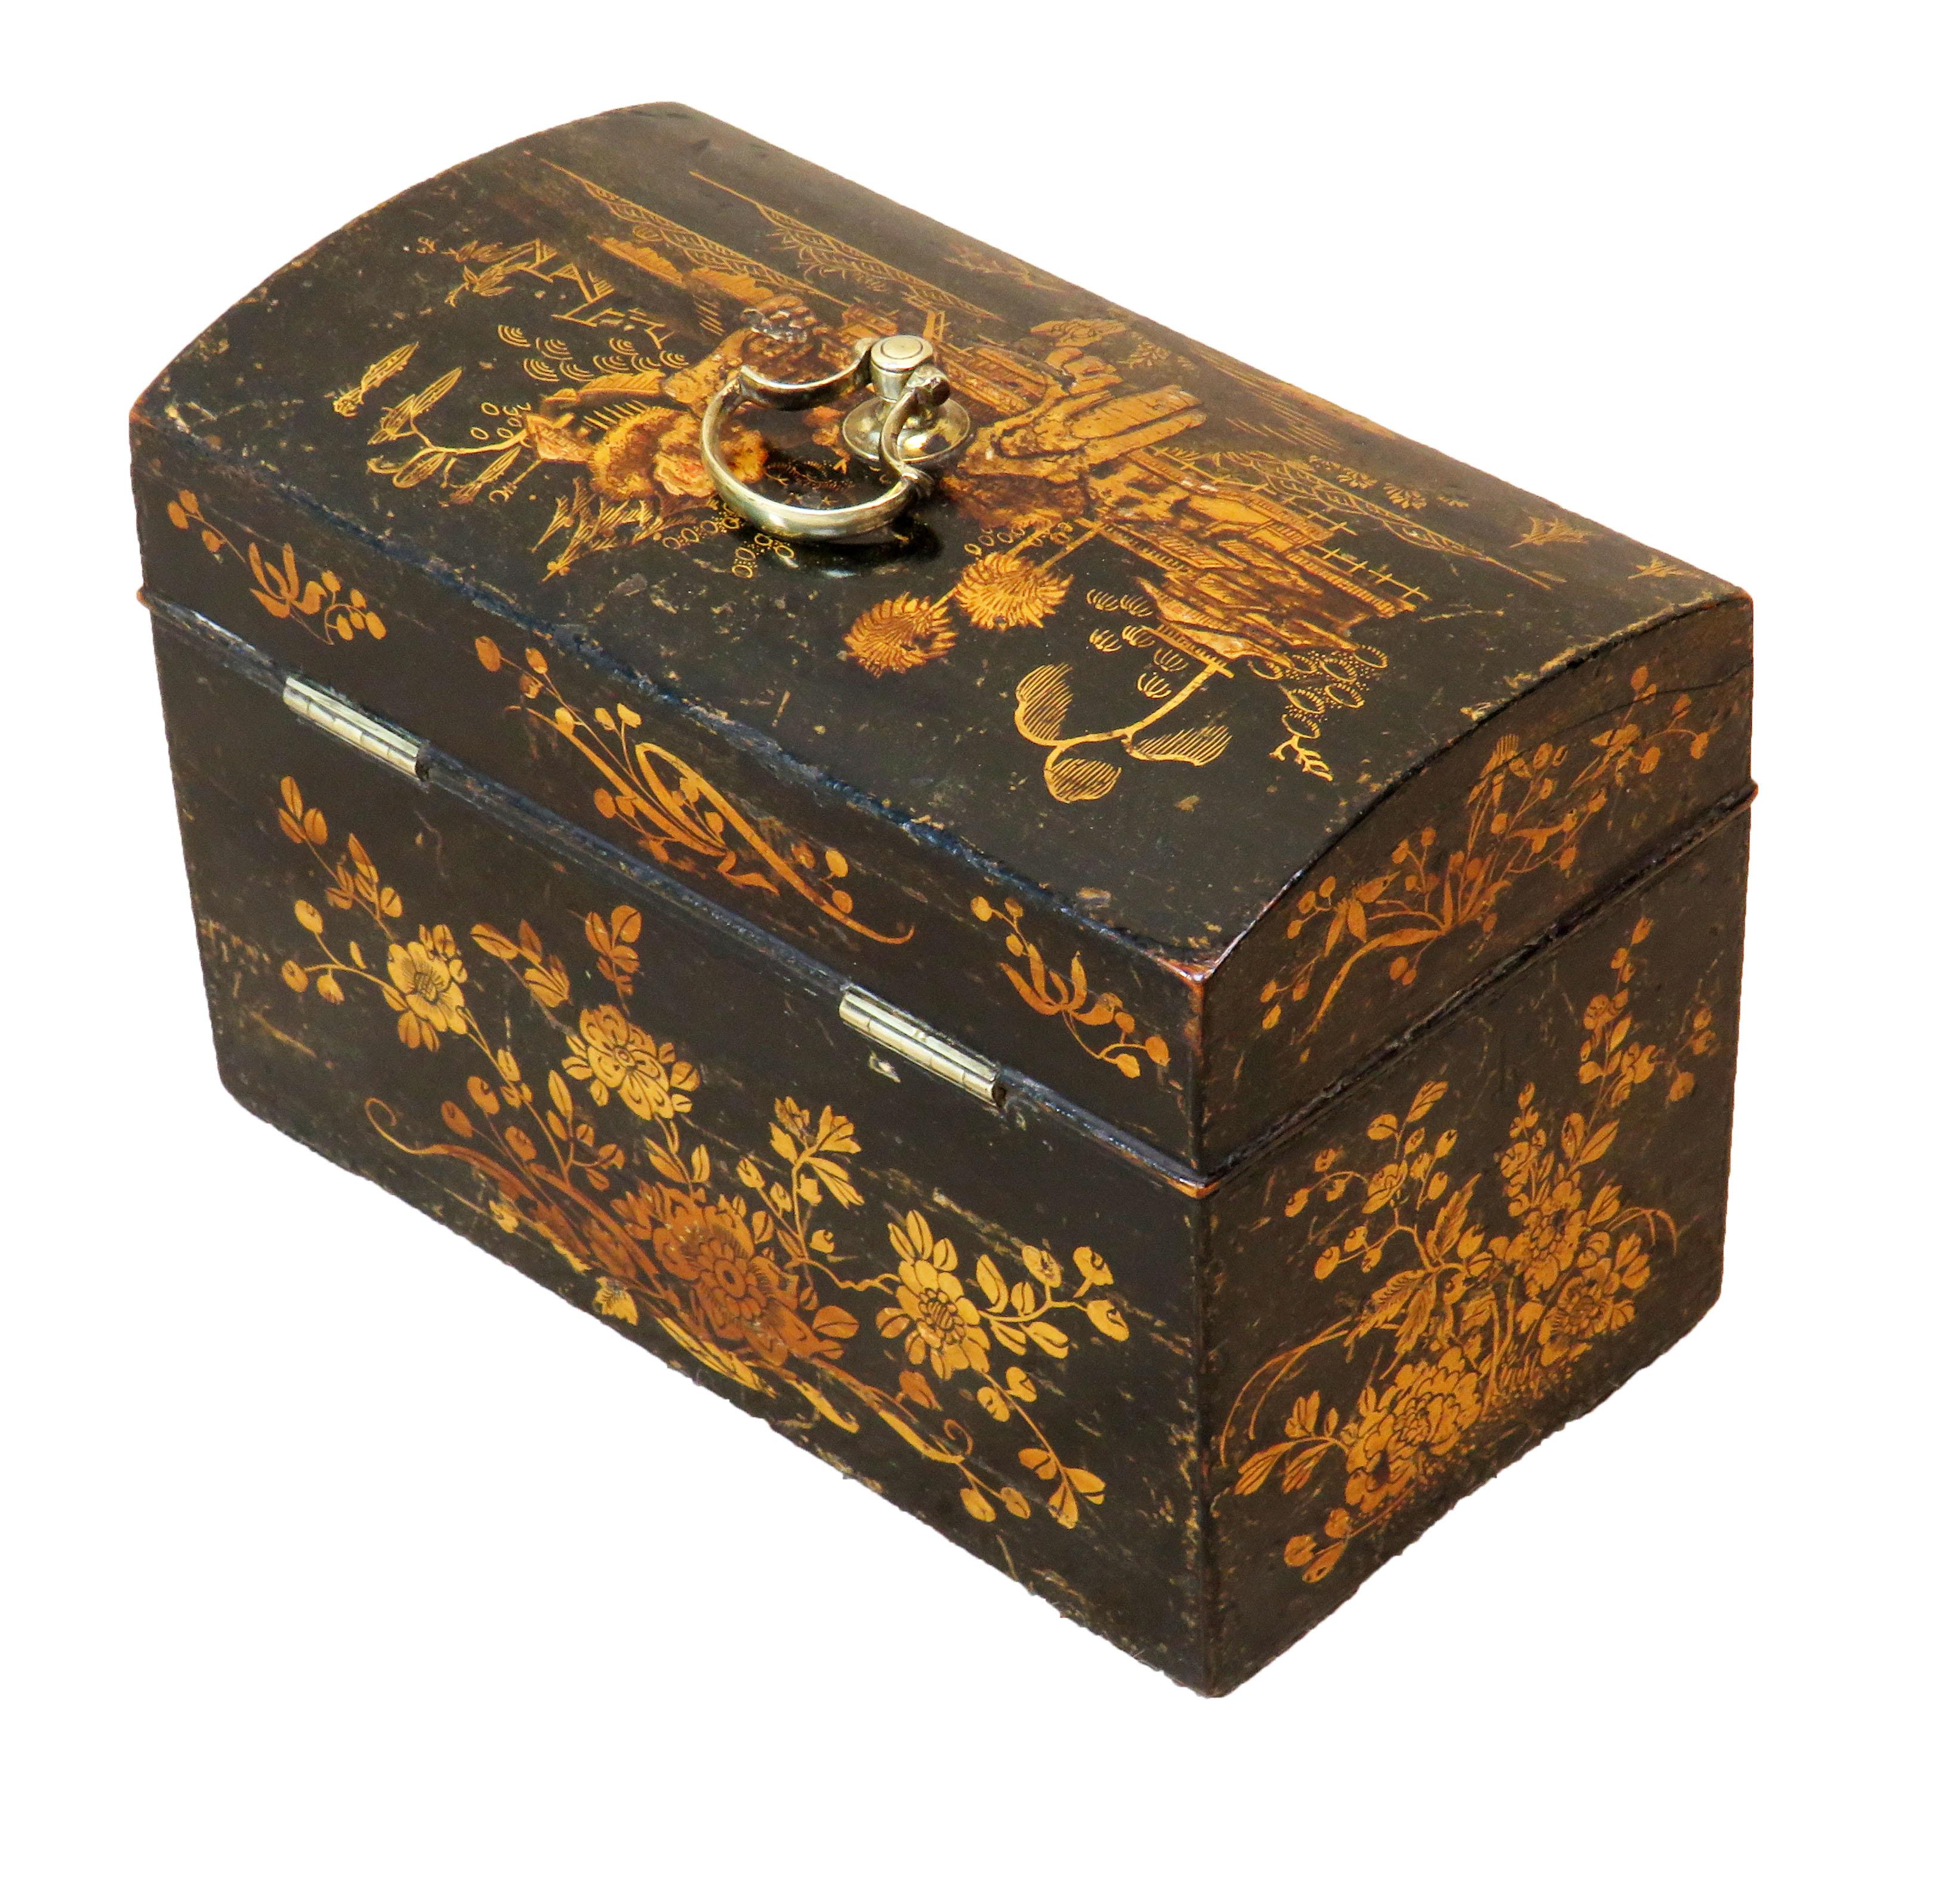 A delightful late 18th century Georgian chinoiserie
Painted and decorated tea caddy having domed lift
Up top retaining original brass axe drop handle

(Dating to the 18th century this tea caddy has certainly seen 
some life. Although the